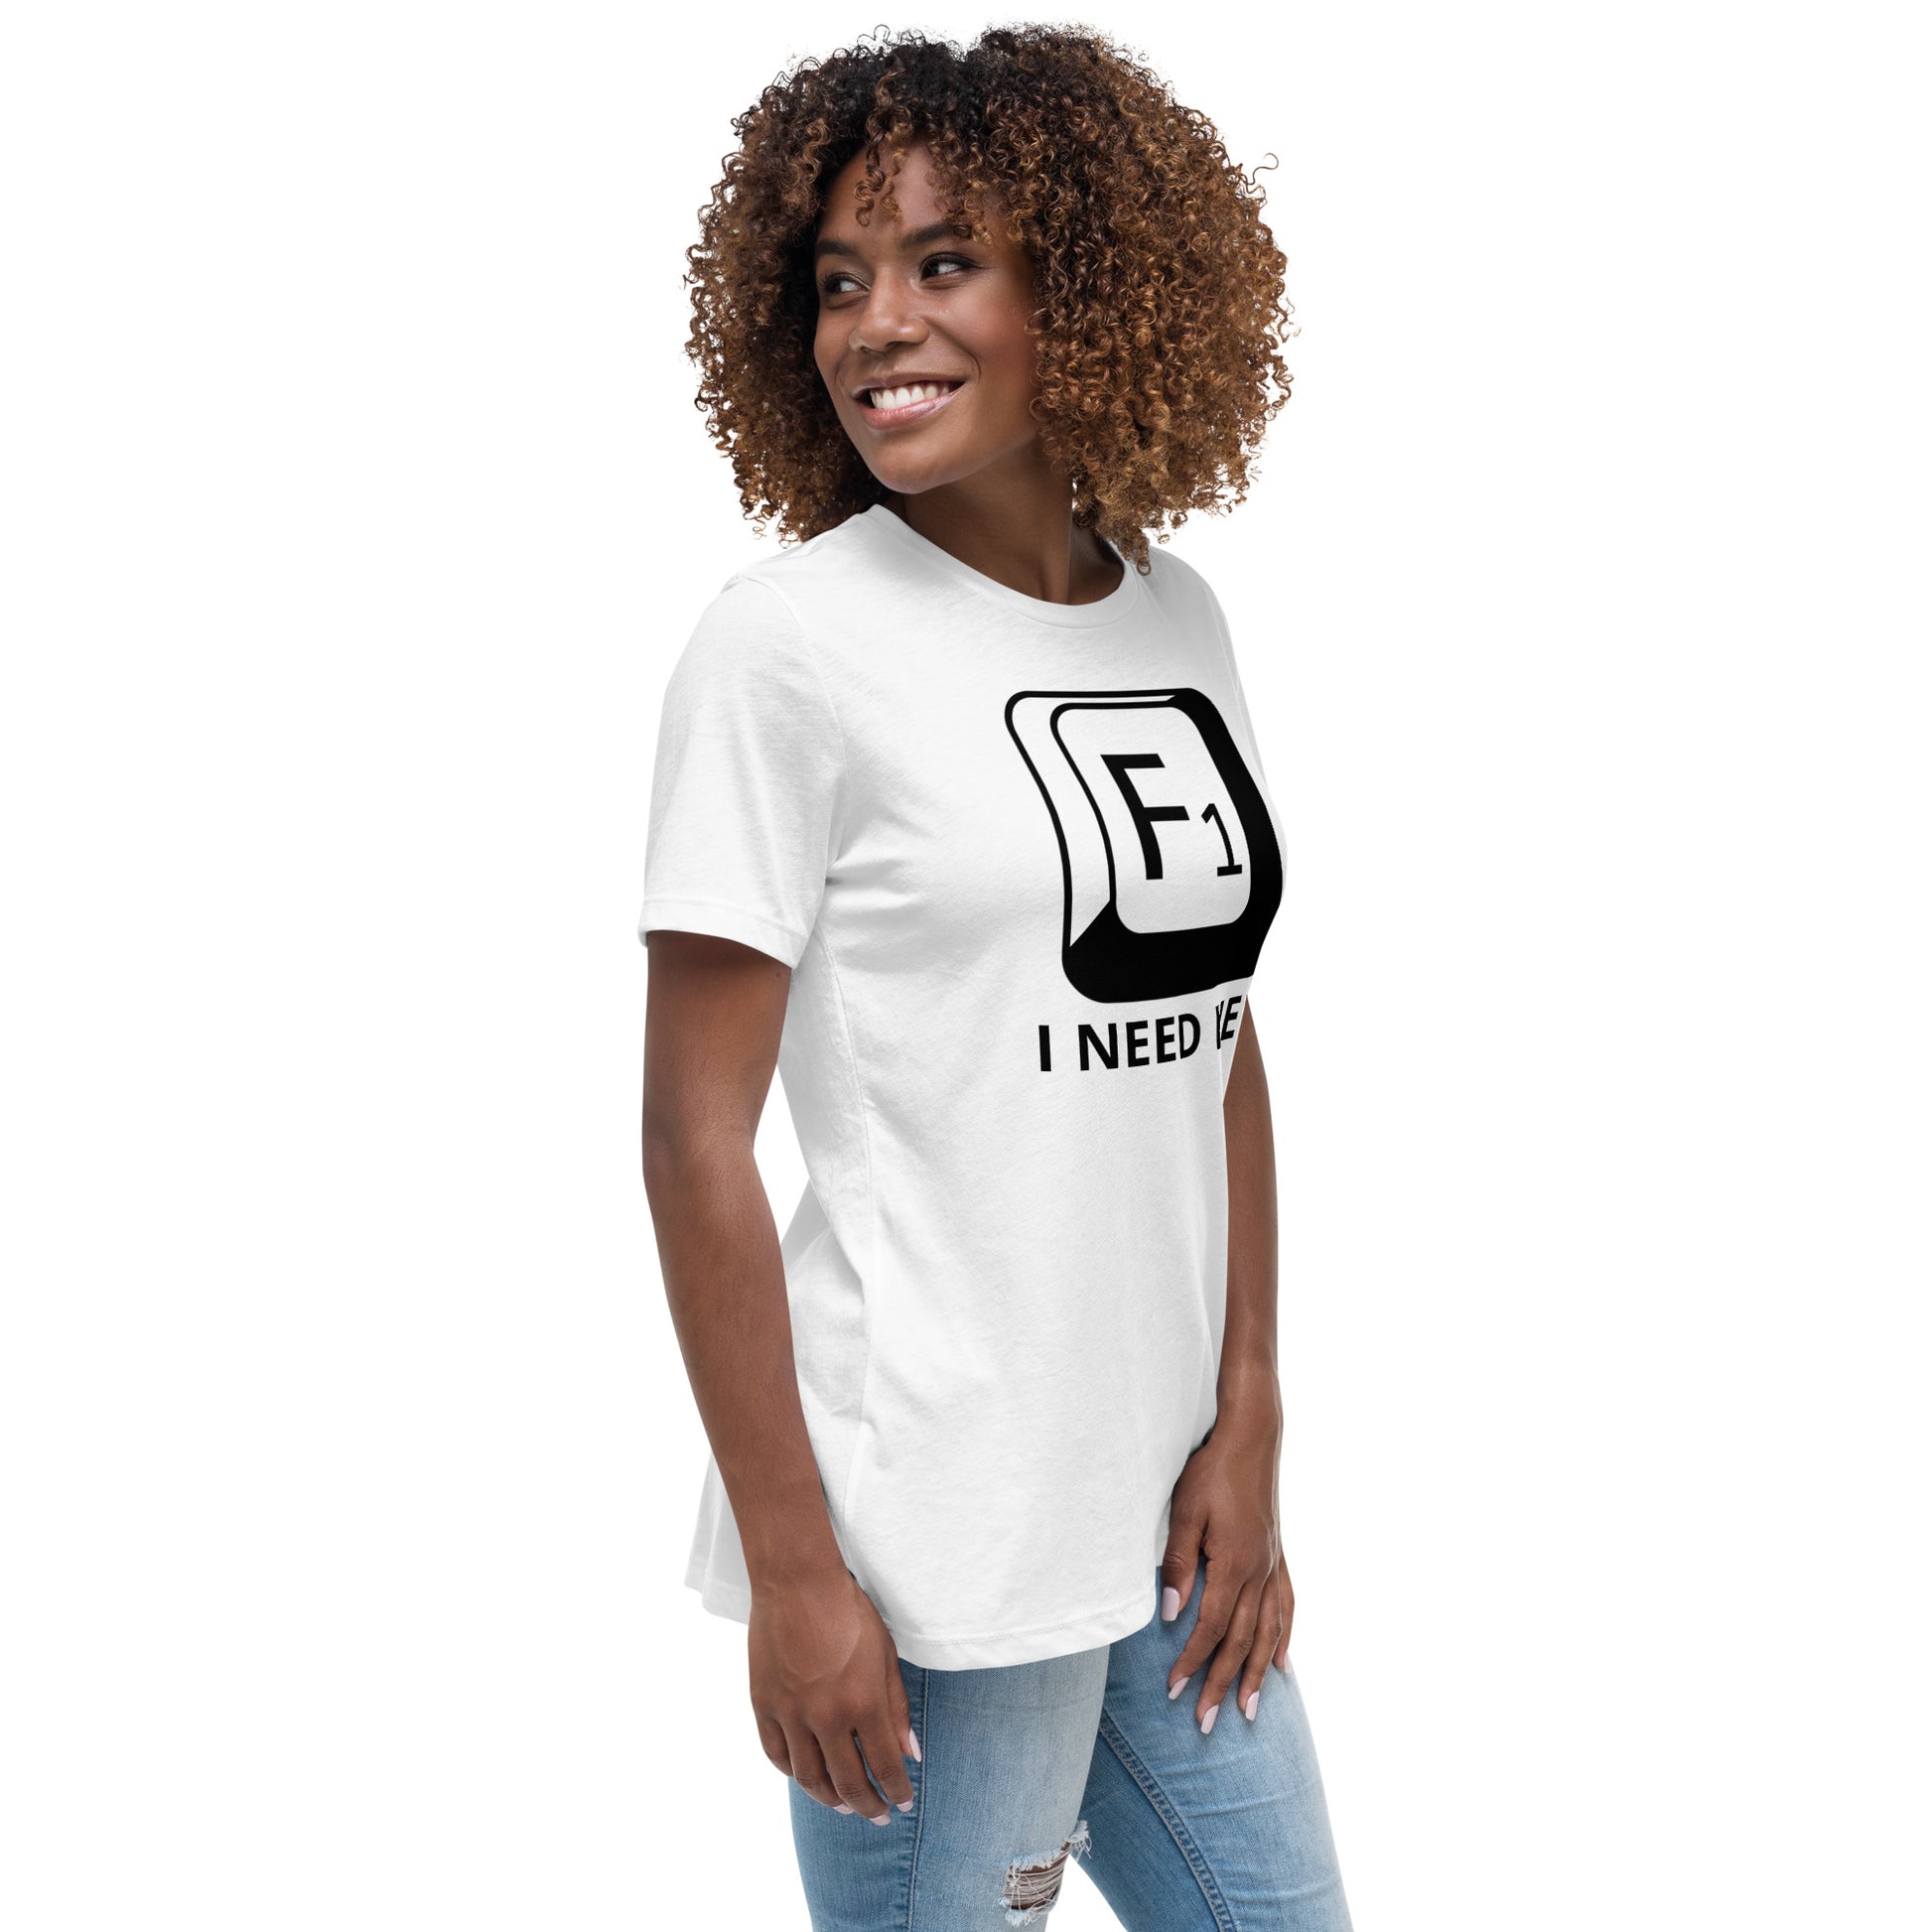 Woman with white t-shirt with picture of "F1" key and text "I need help"